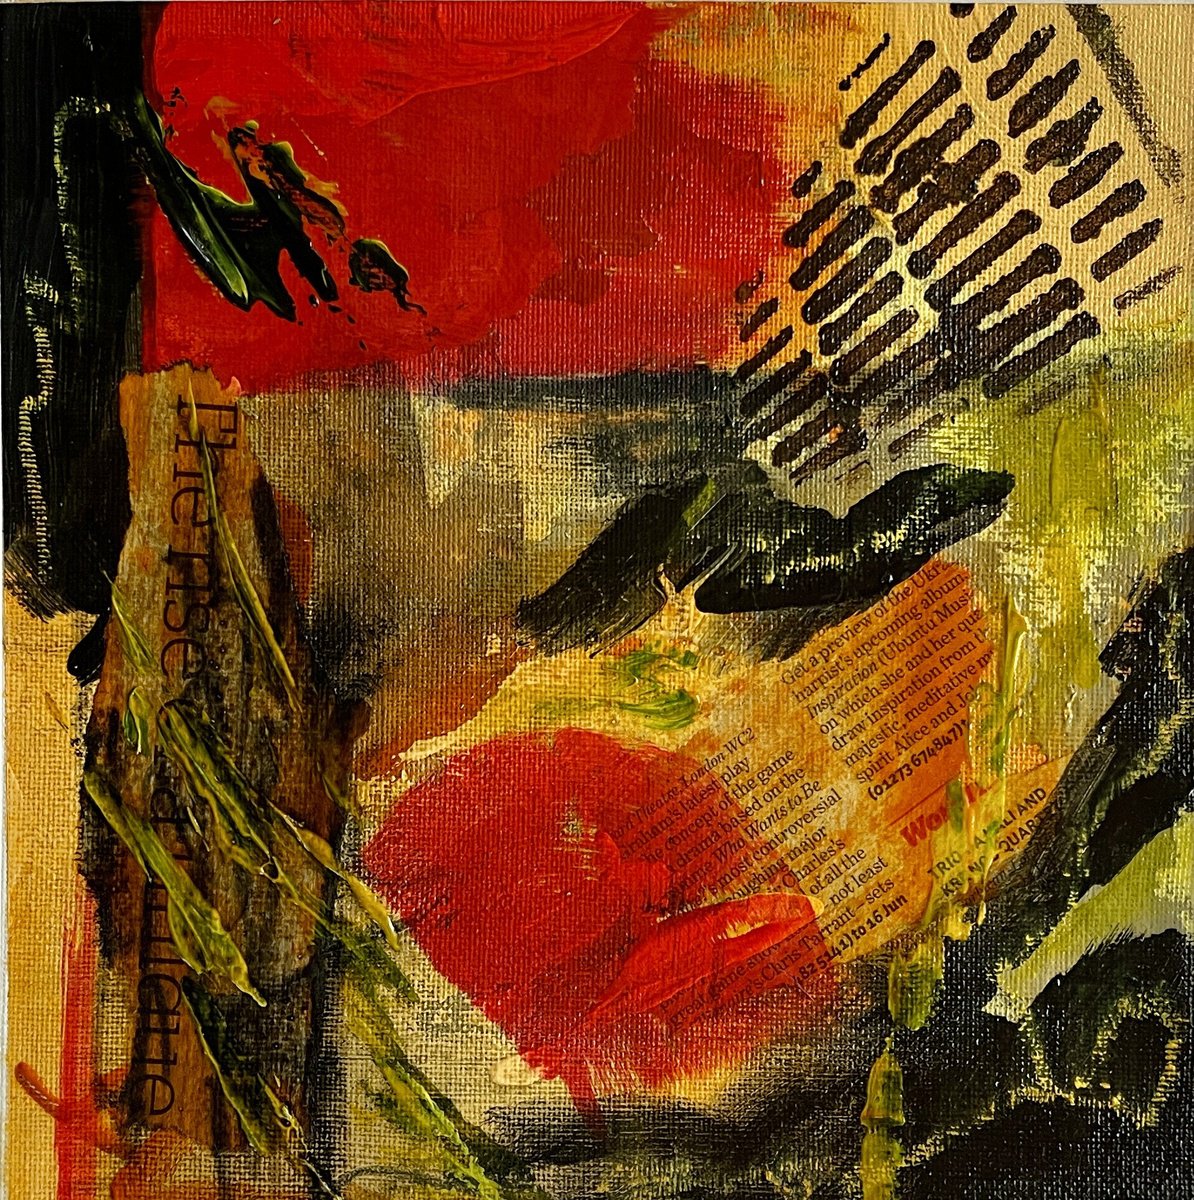 Nr 1 of a Red and Yellow Abstract Series by Marja Brown